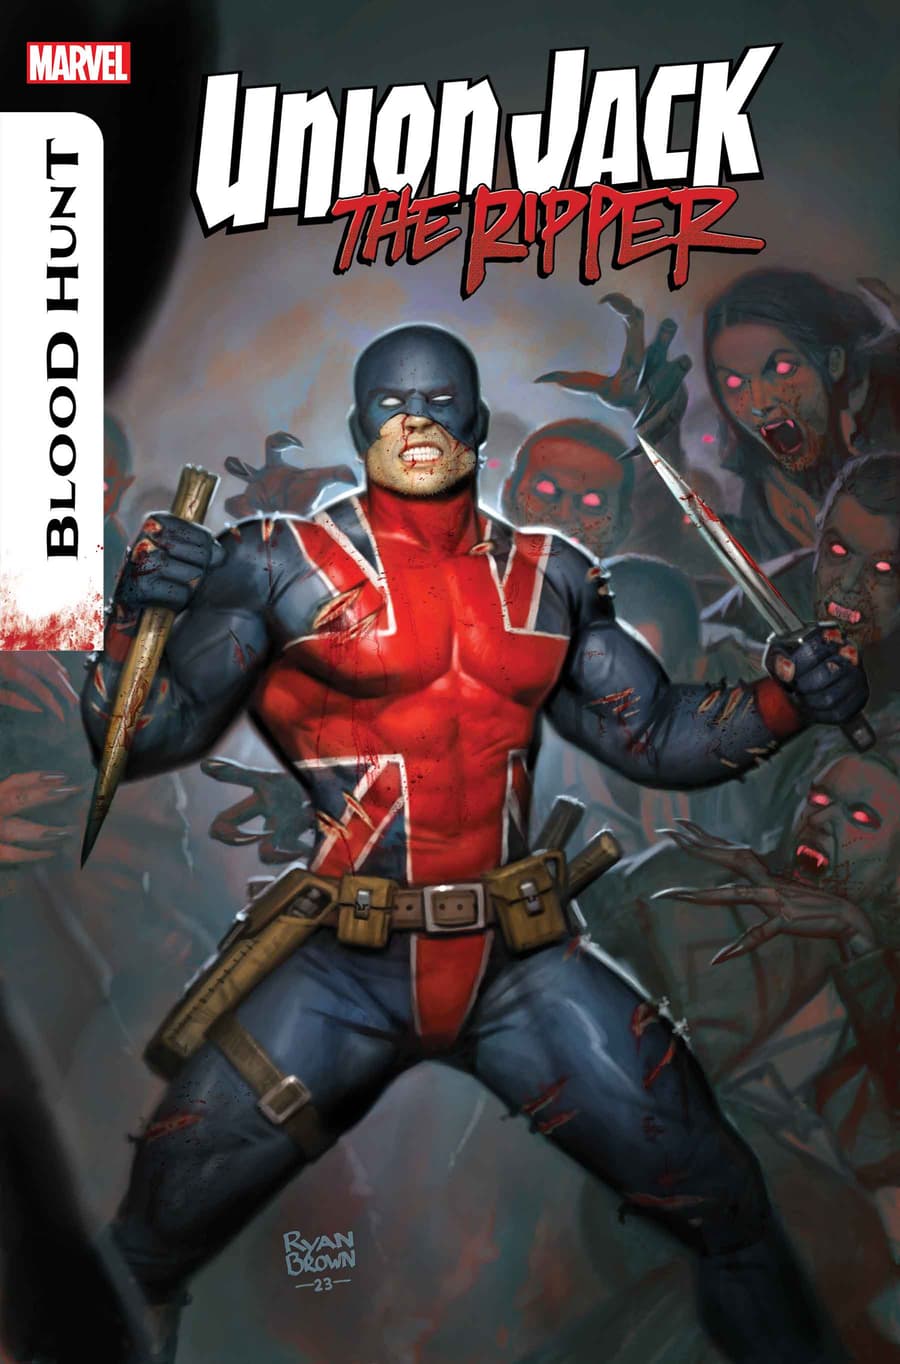 UNION JACK THE RIPPER: BLOOD HUNT #1 cover by Ryan Brown